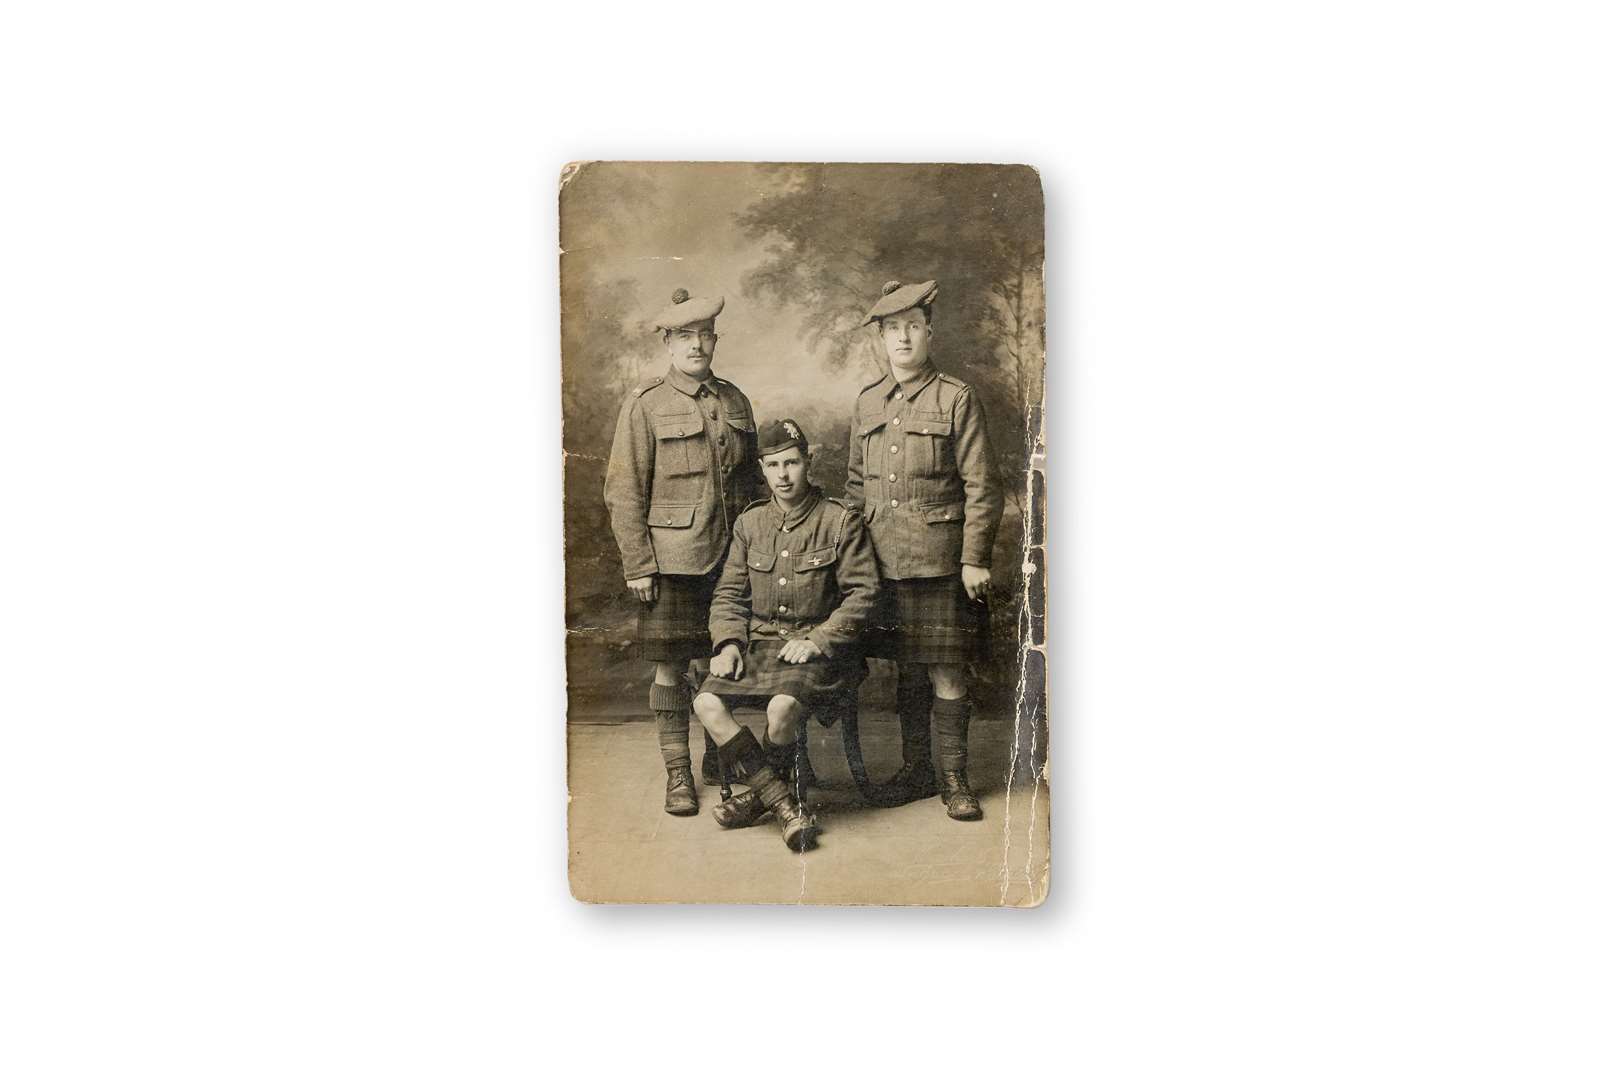 Joseph Anderson MacPheat (seated) photographed at Nigg before service in World War I.